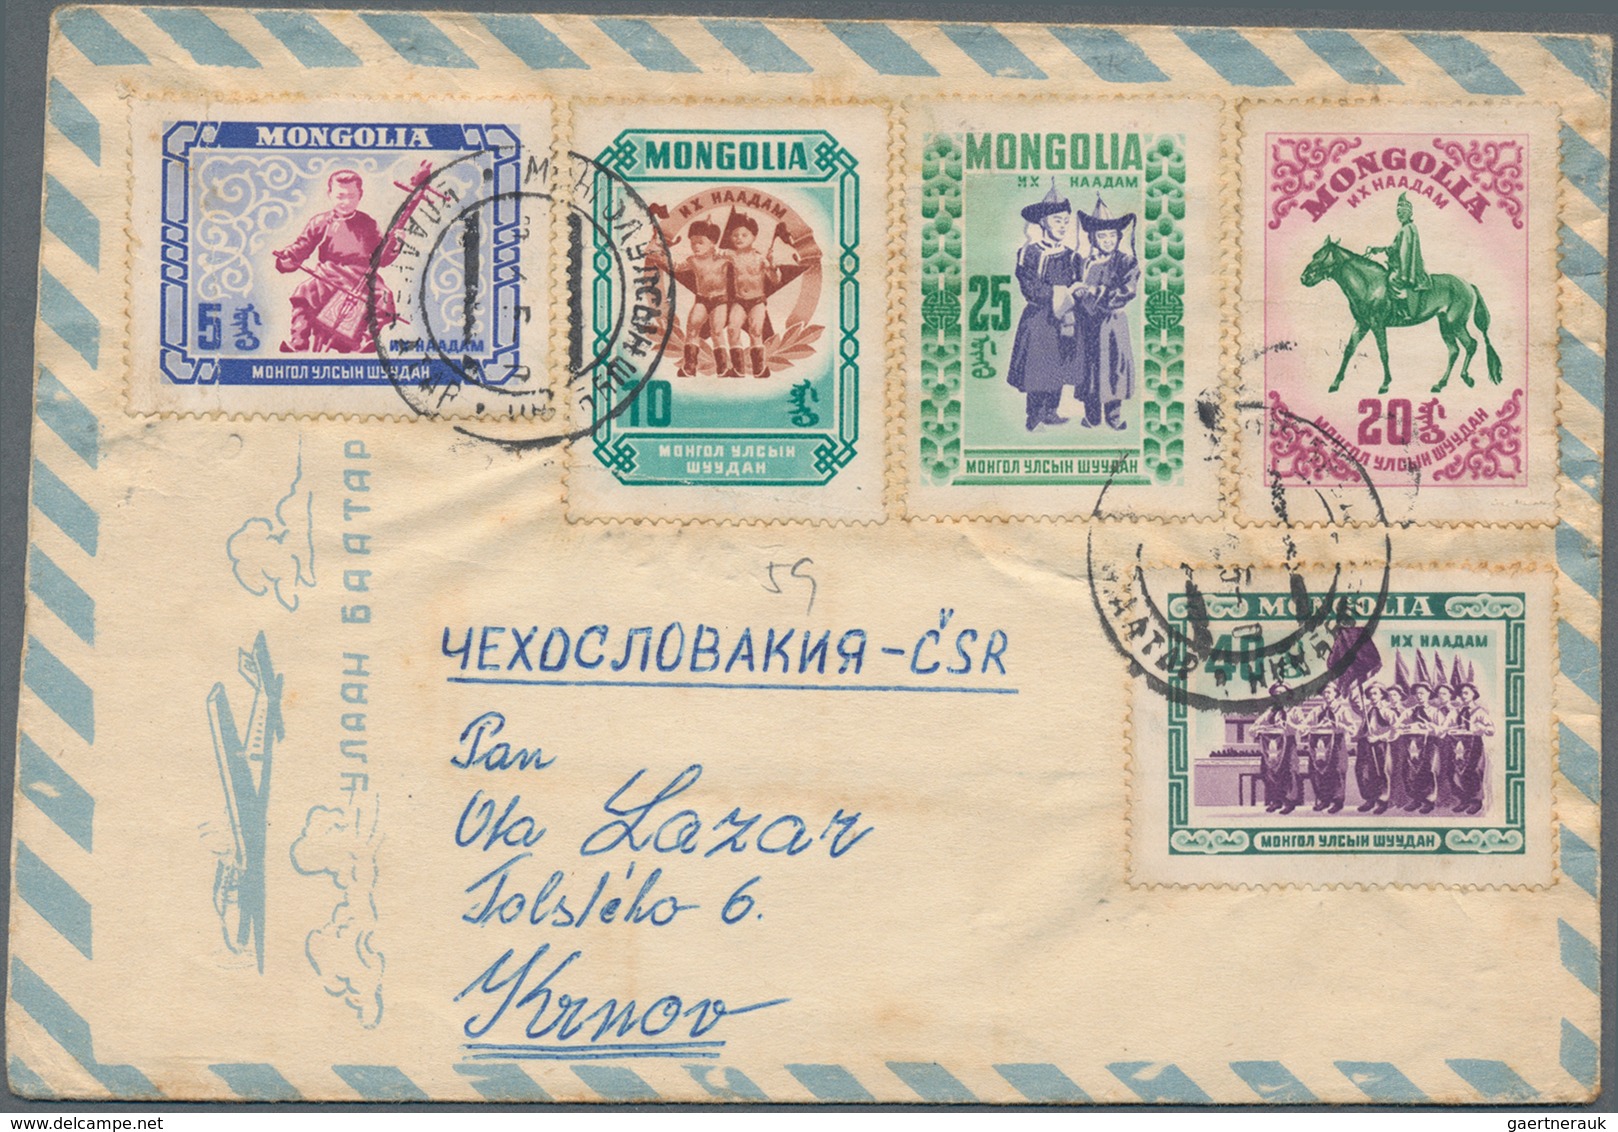 Mongolei: 1956/1961, 16 Covers To Europe All With Some Traces Of Usage. Very Scarce Offer. - Mongolië